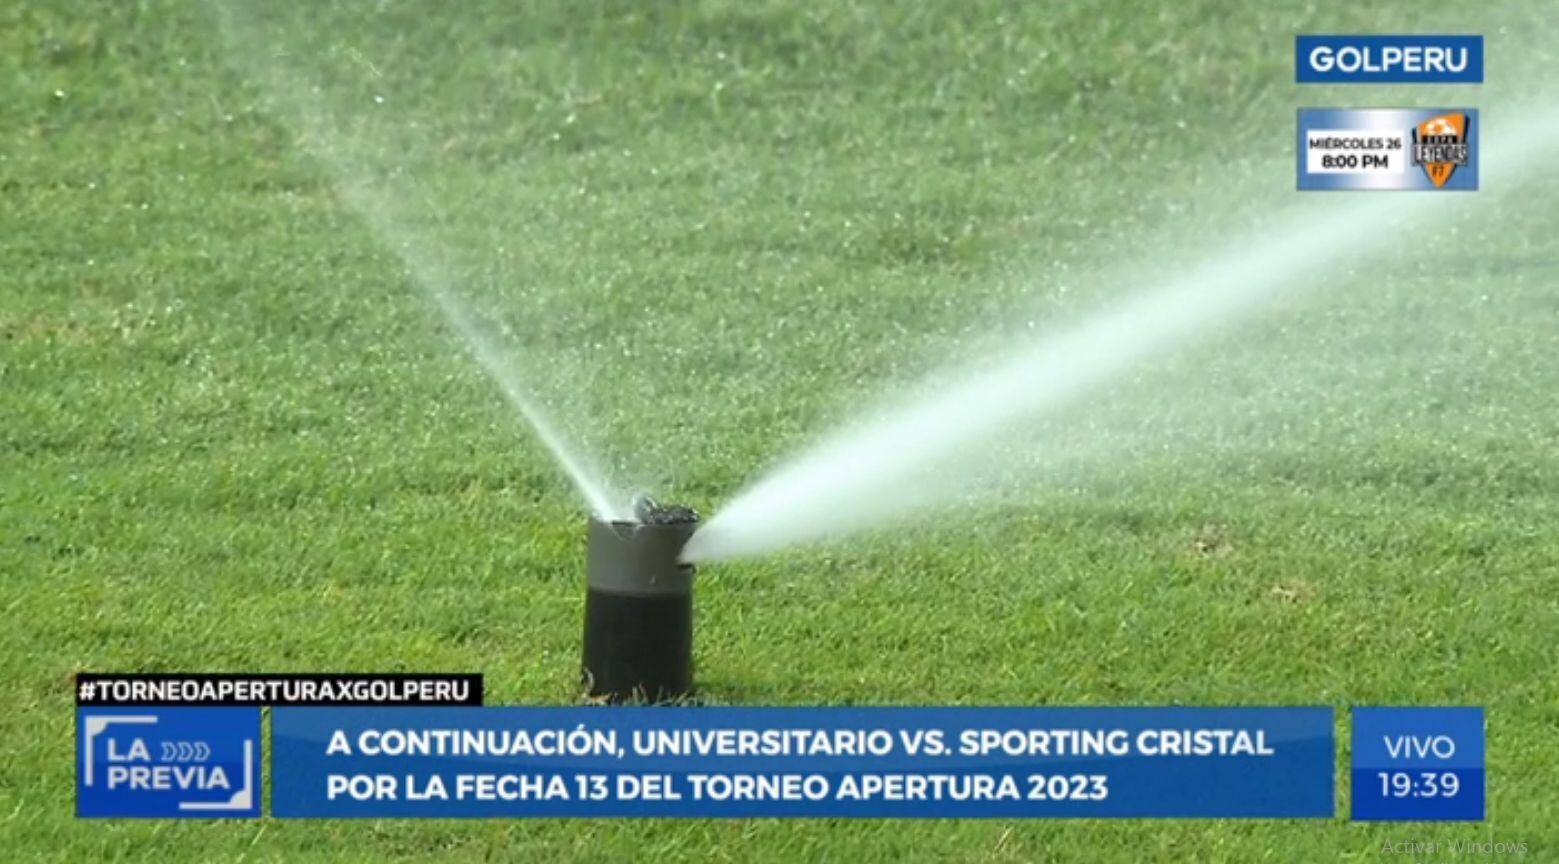 Field of the Monumental Stadium in the preview of the Universitario vs Sporting Cristal.